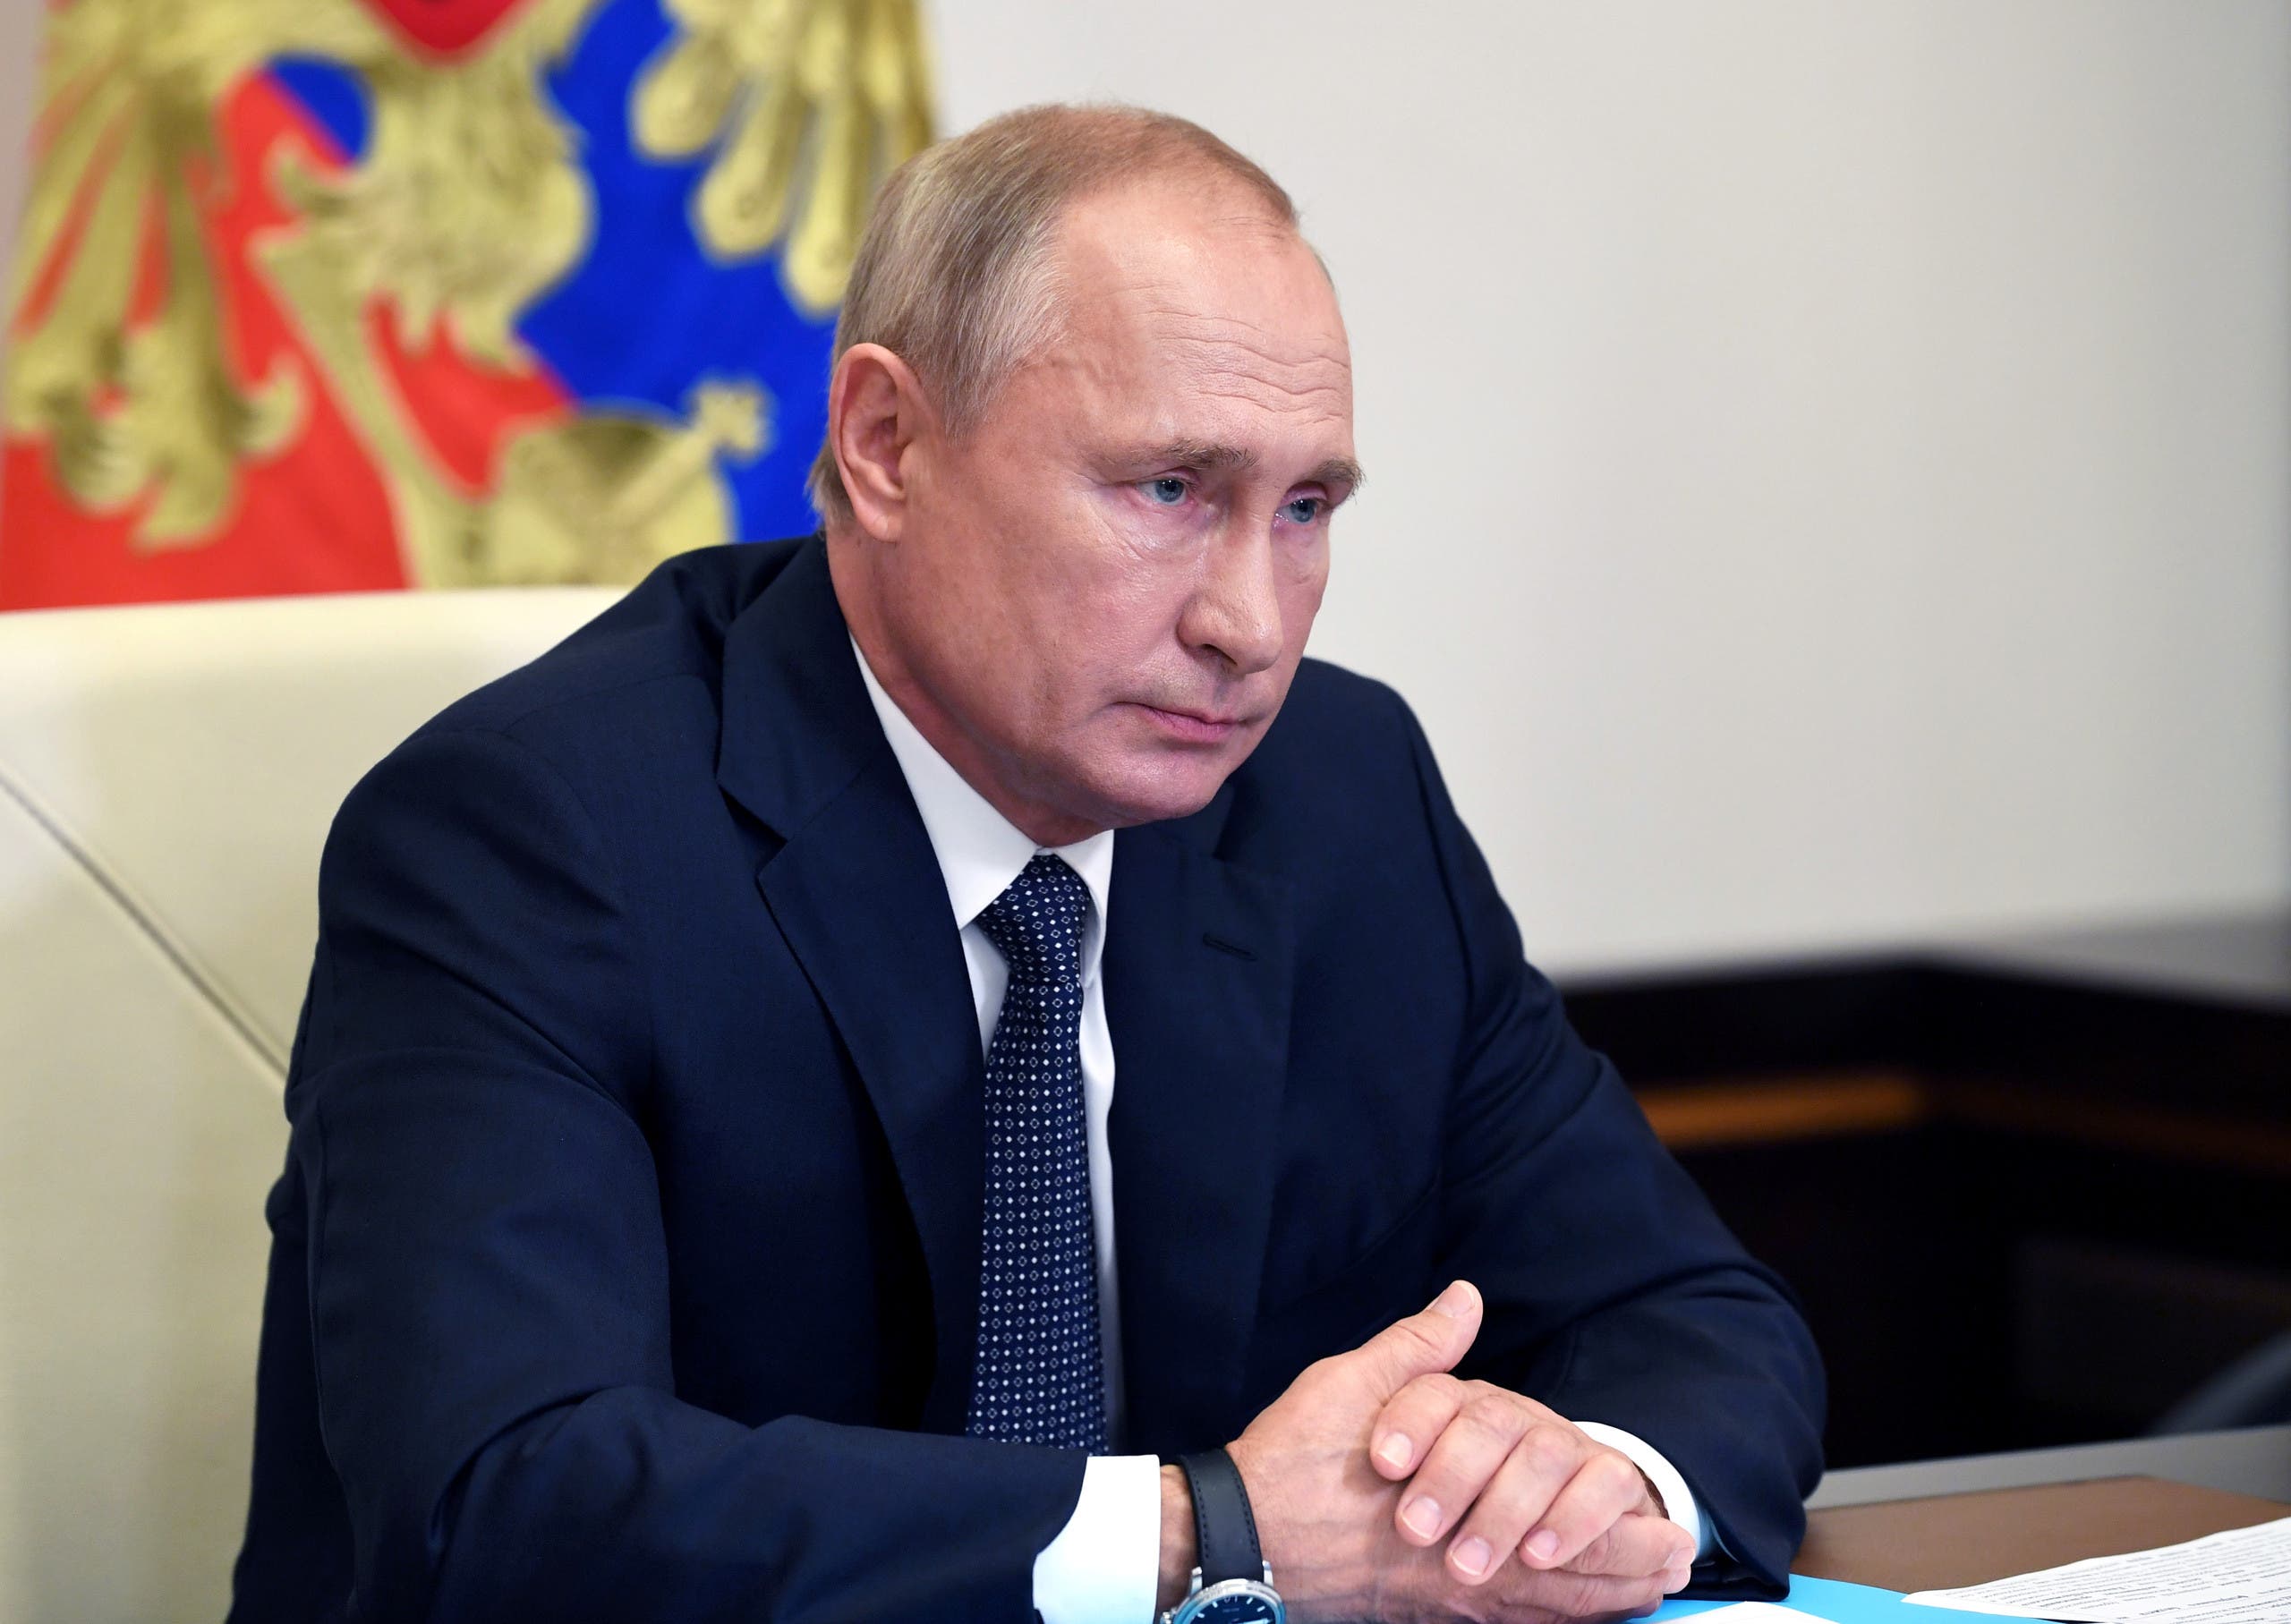 Russian President Vladimir Putin chairs a meeting with members of the government via video link at the Novo-Ogaryovo state residence outside Moscow, Russia August 11, 2020. (Reuters)